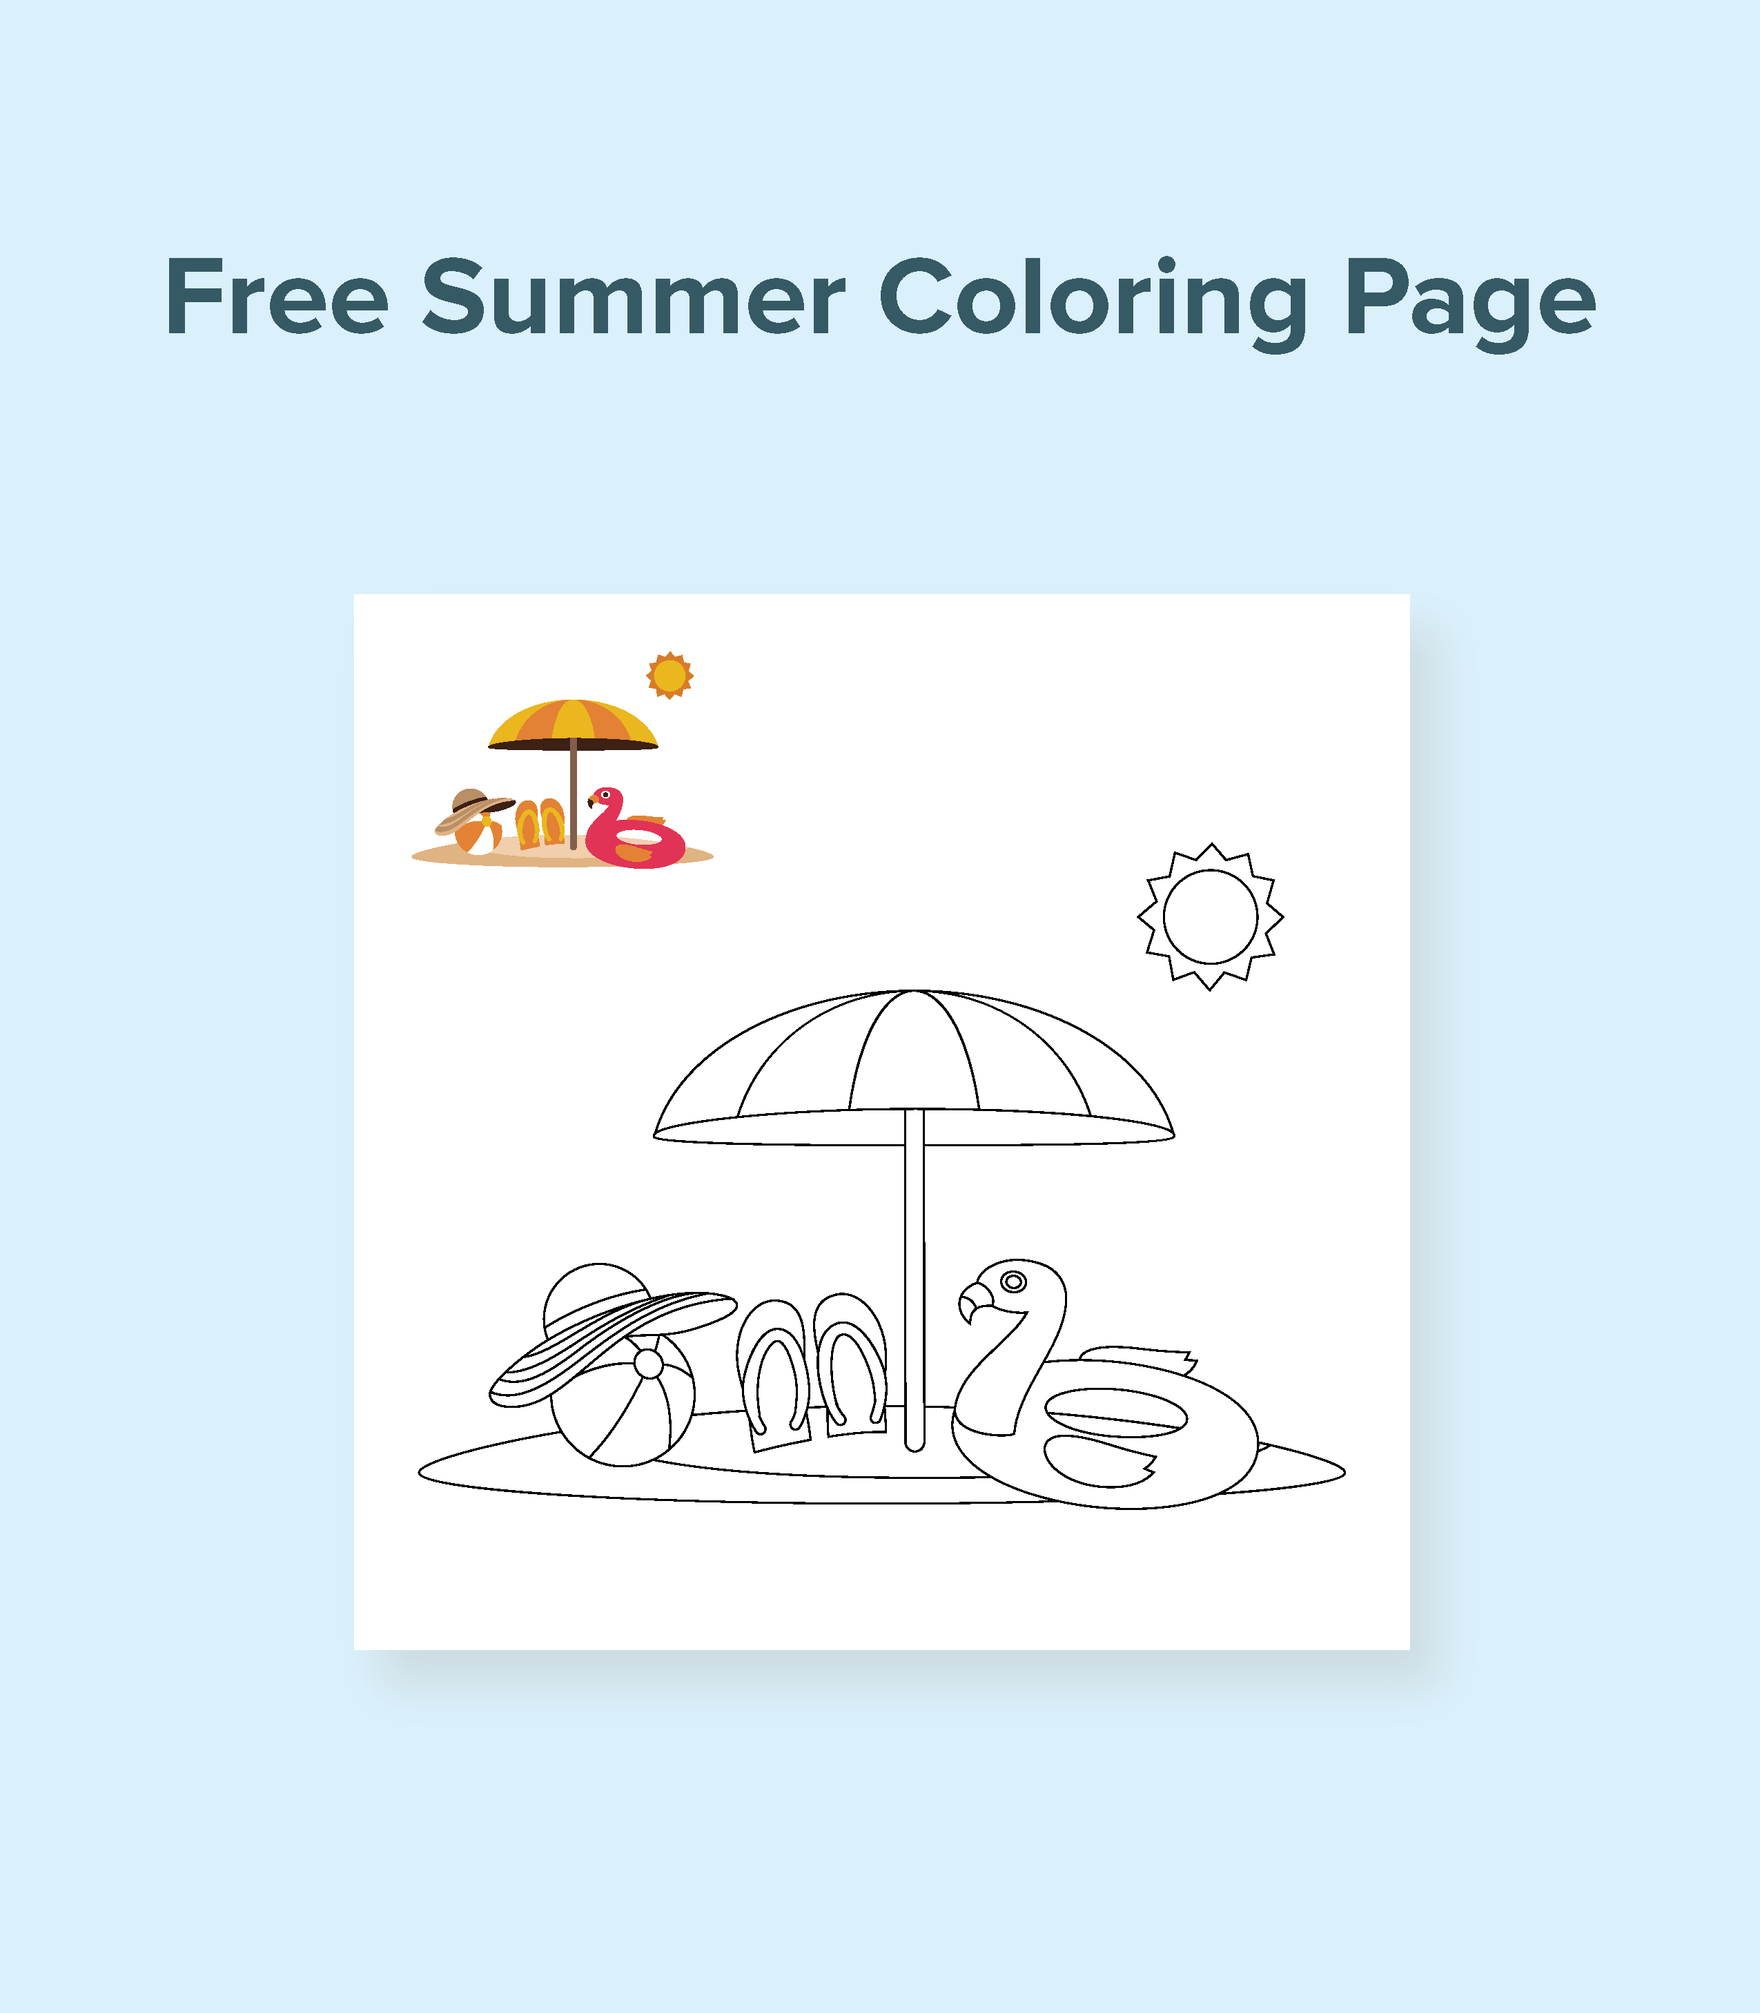 Free Summer Coloring Page